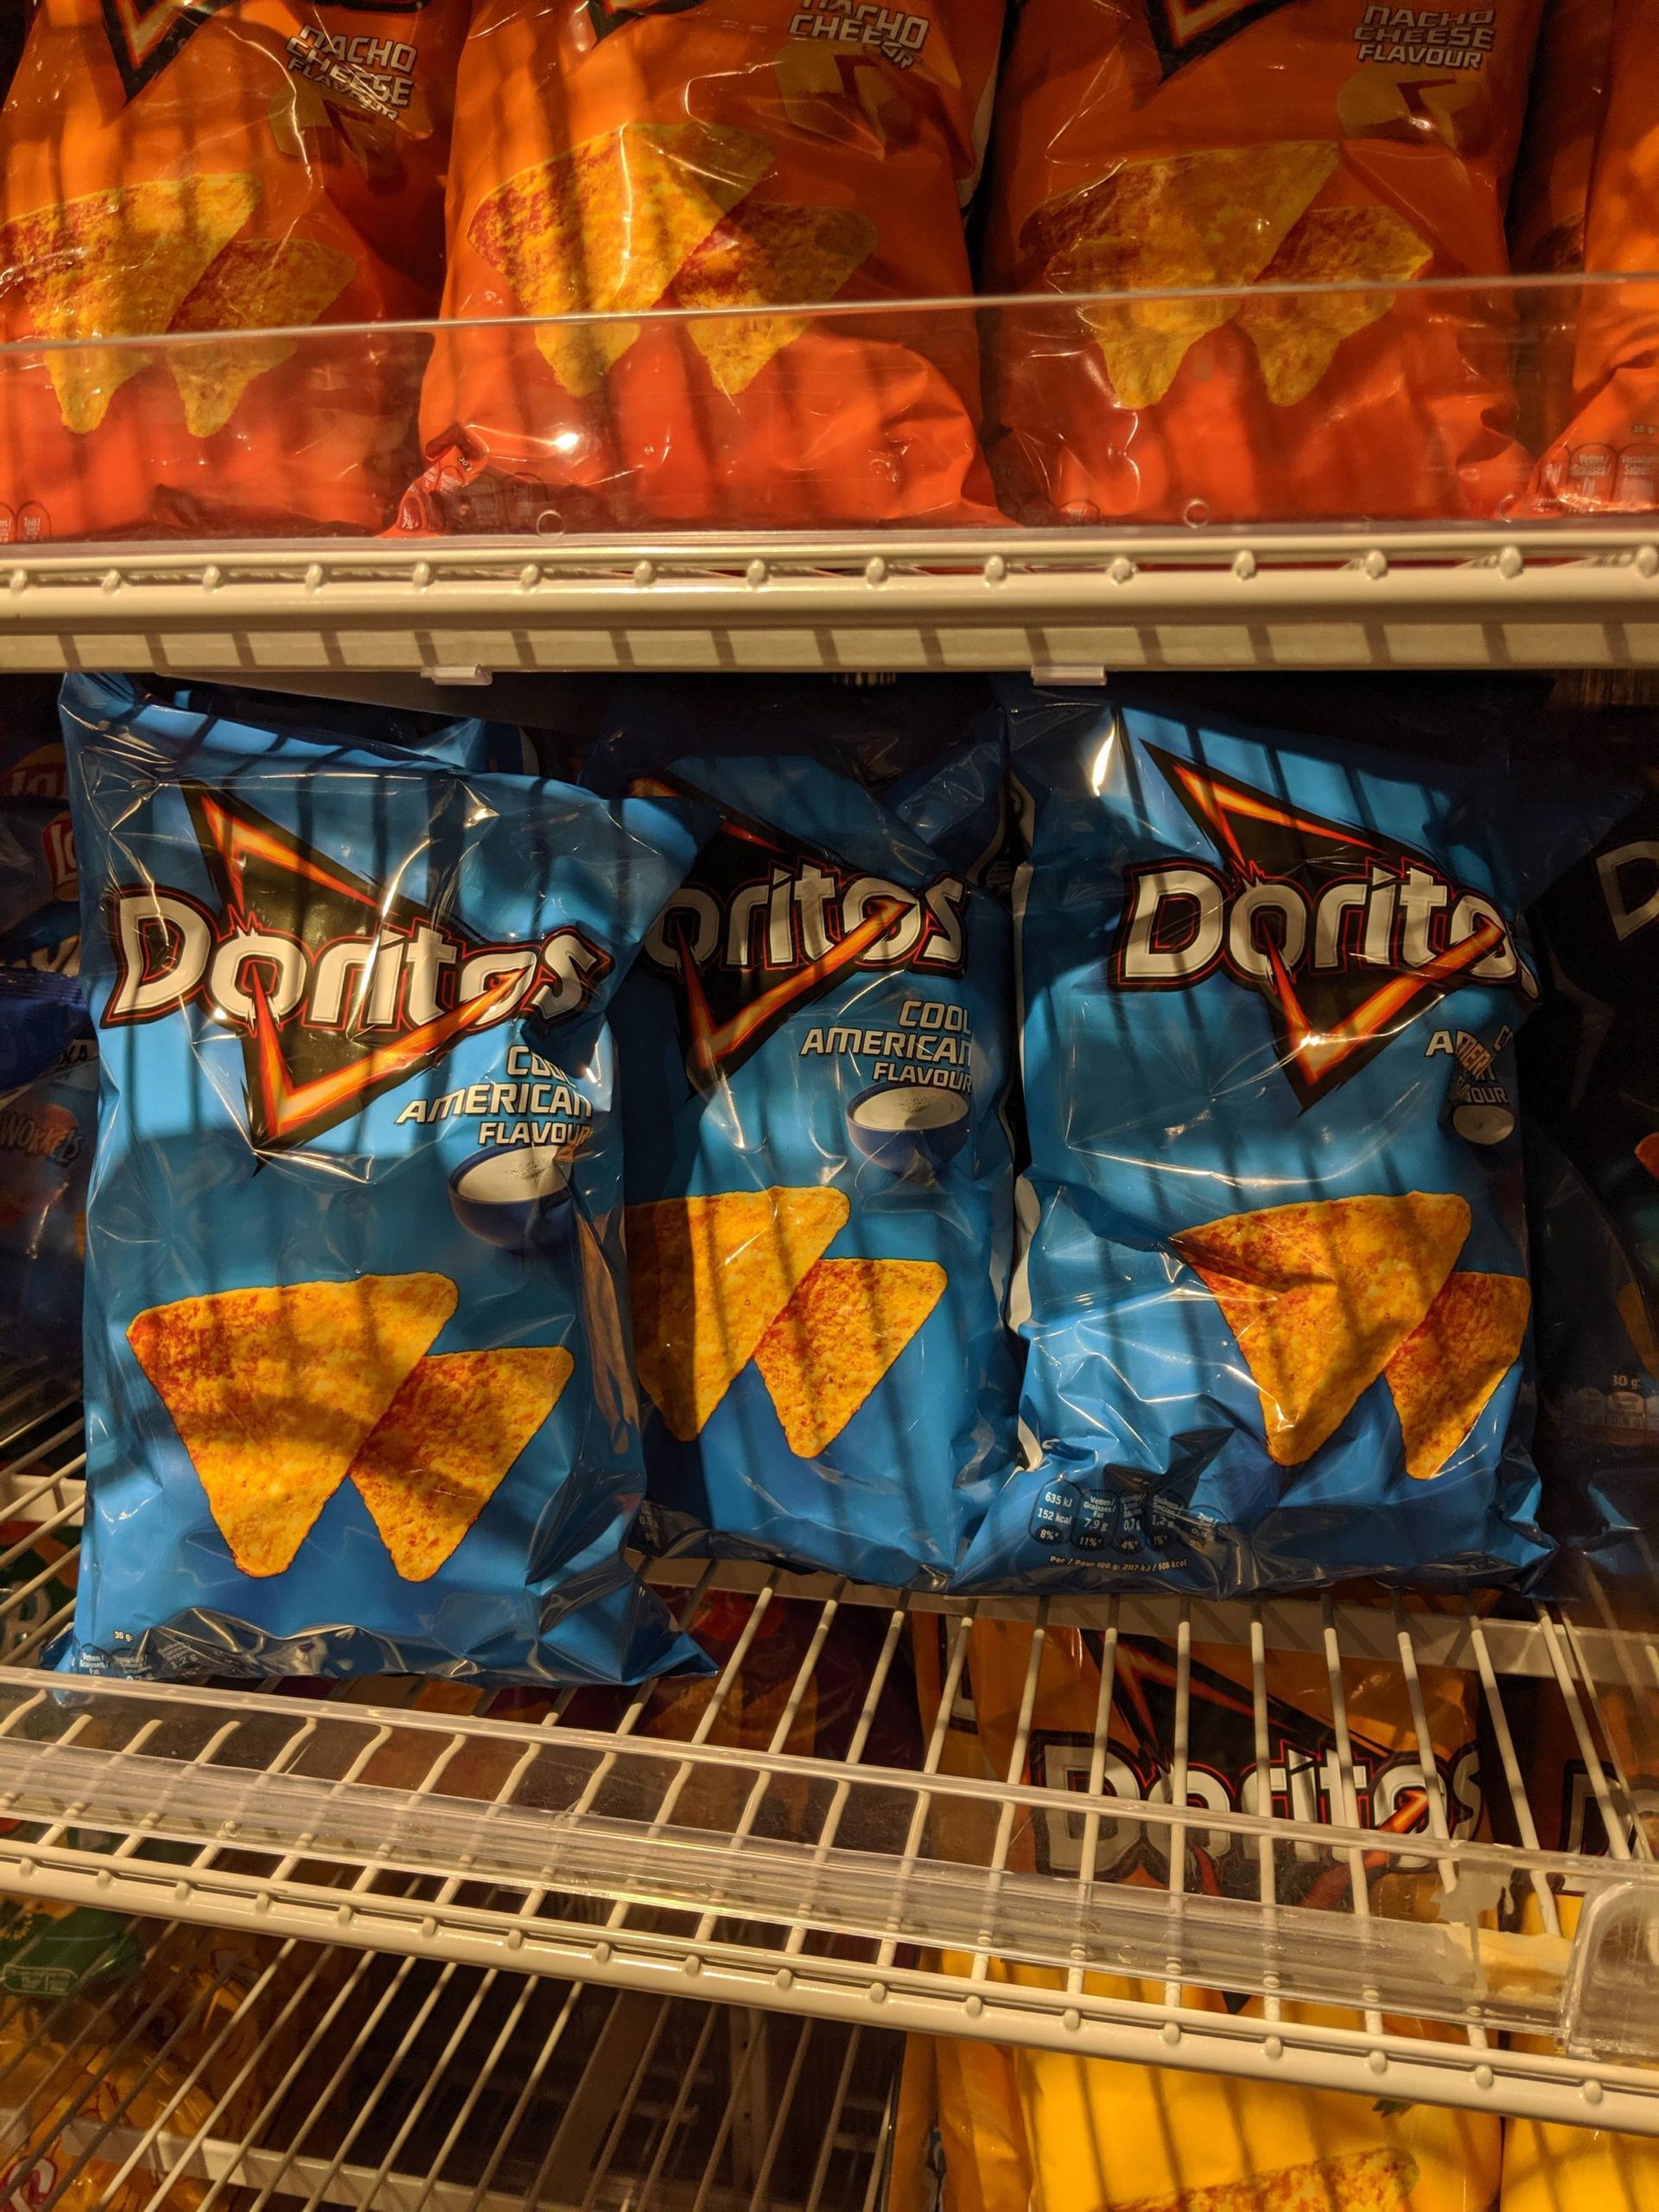 In+the+Netherlands%2C+Cool+Ranch+Doritos+are+called+Cool+American+Doritos